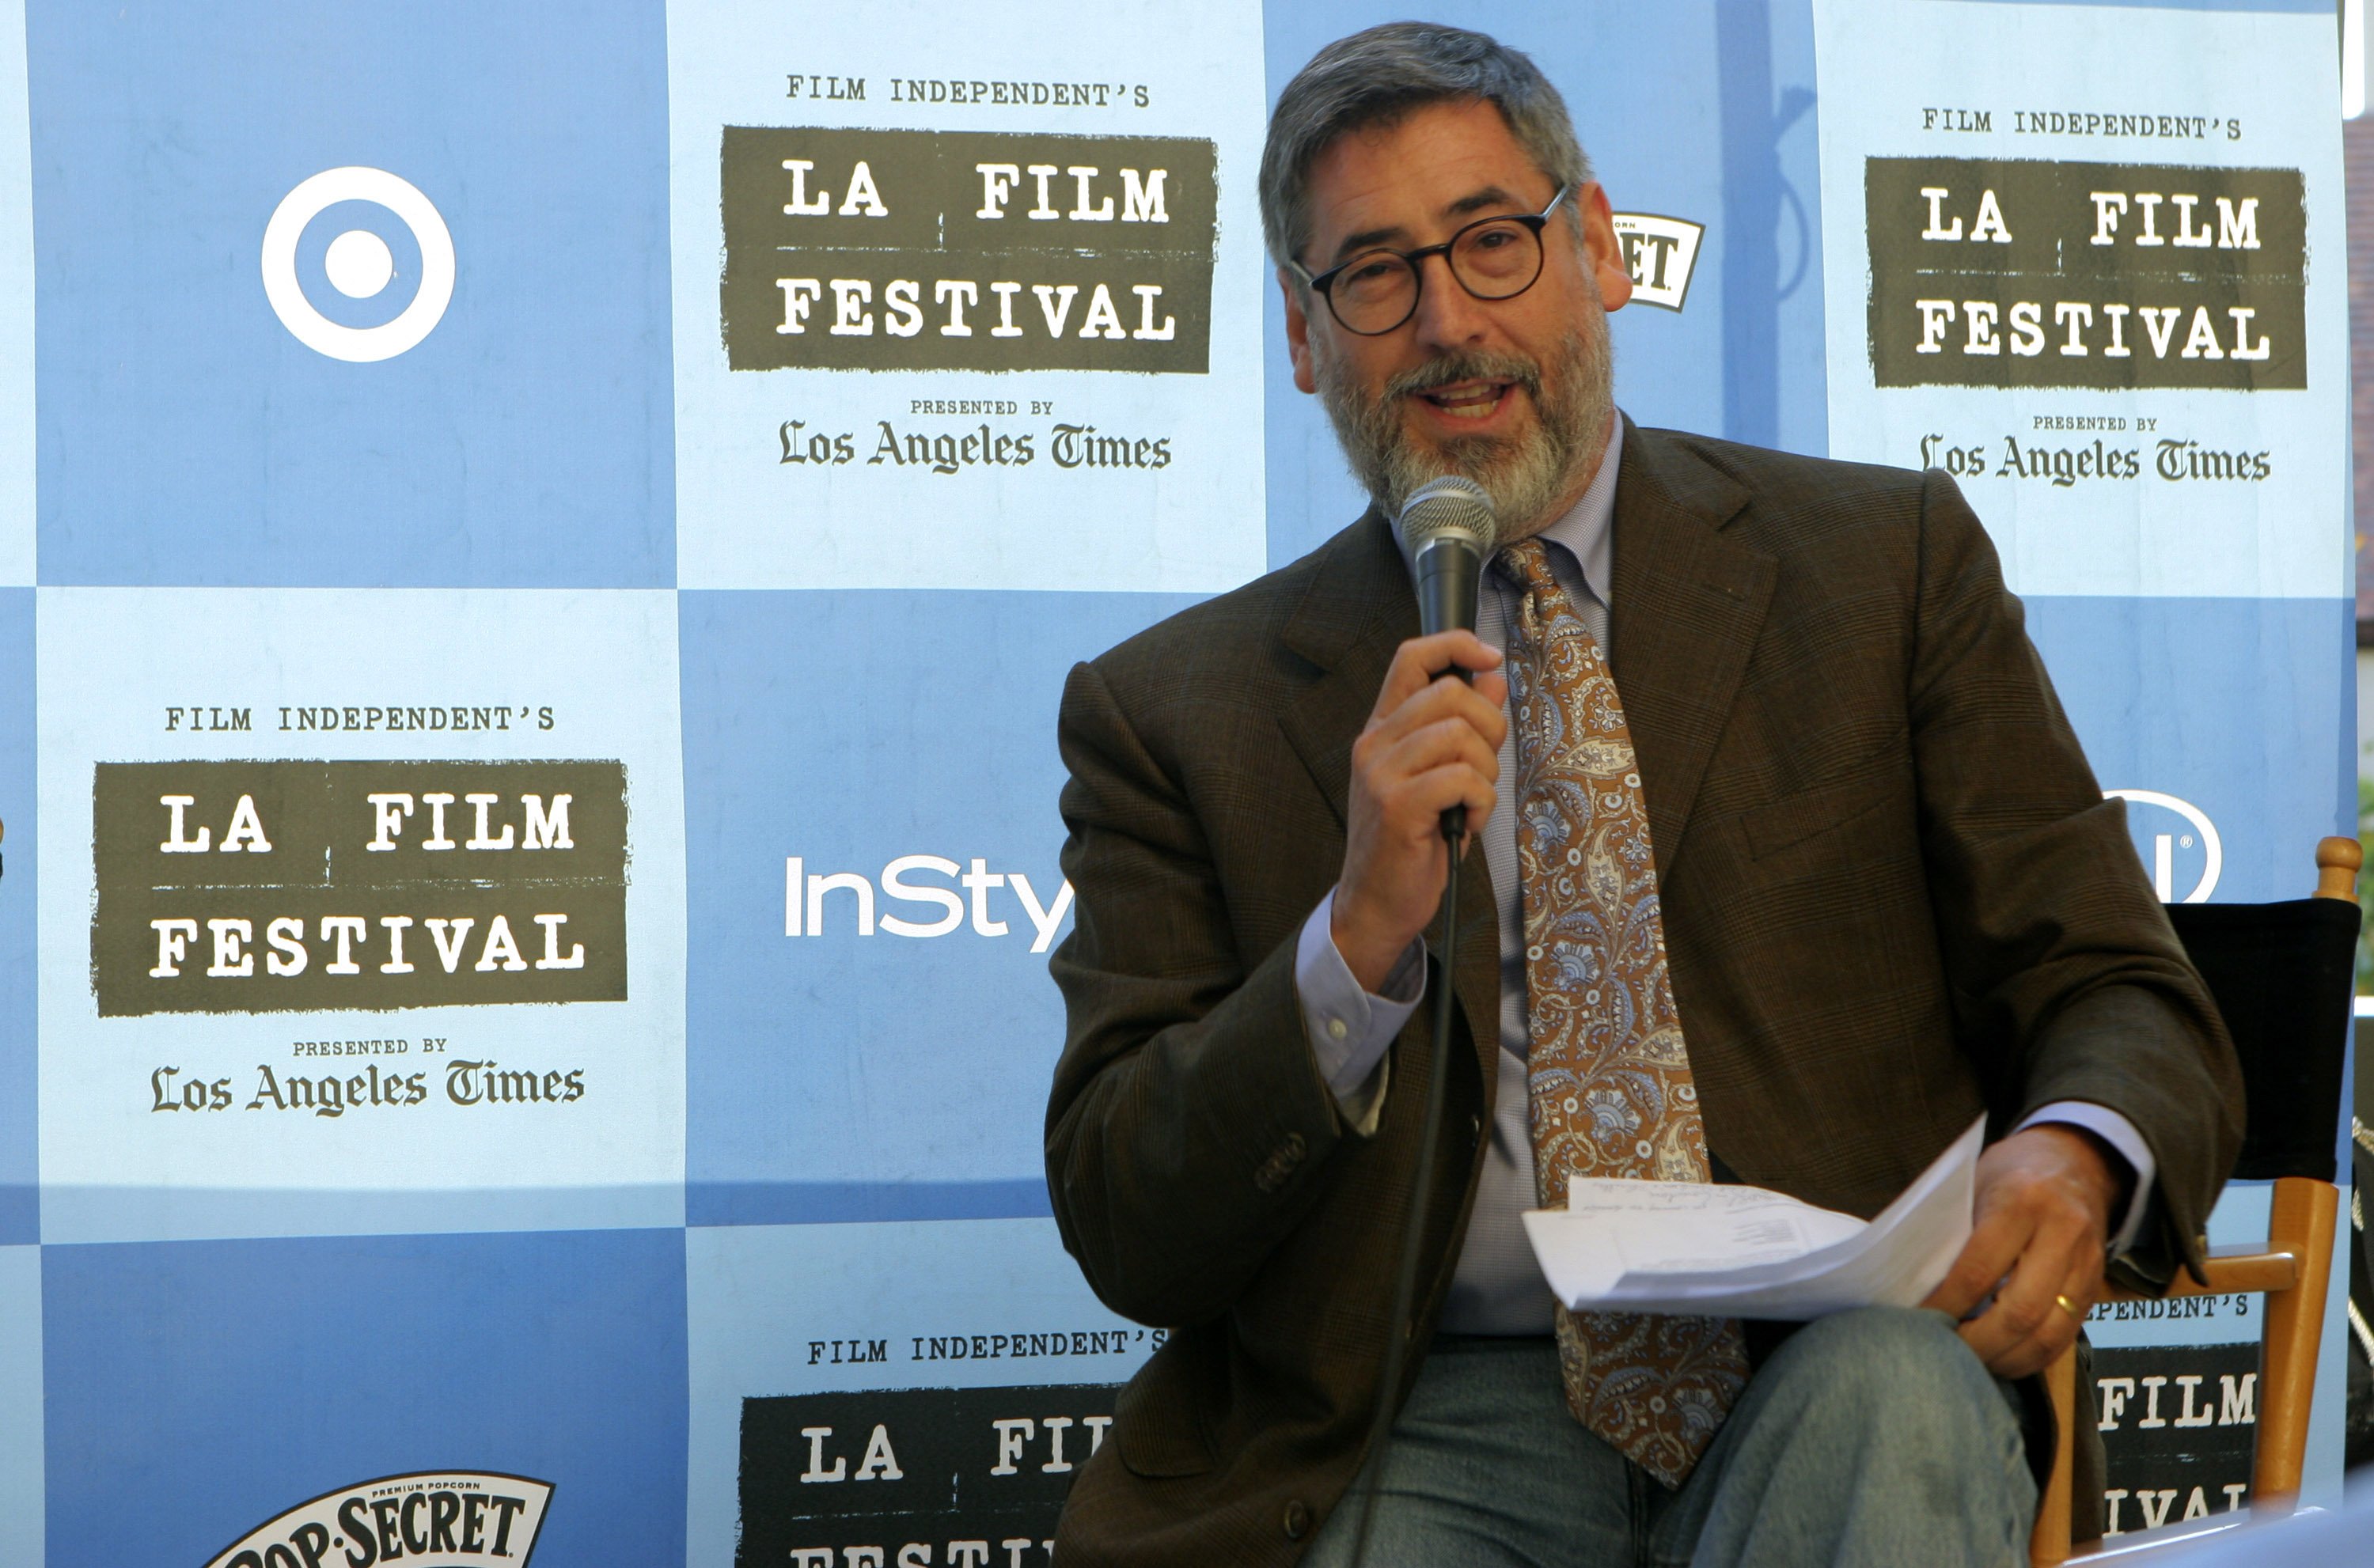 John Landis with a microphone